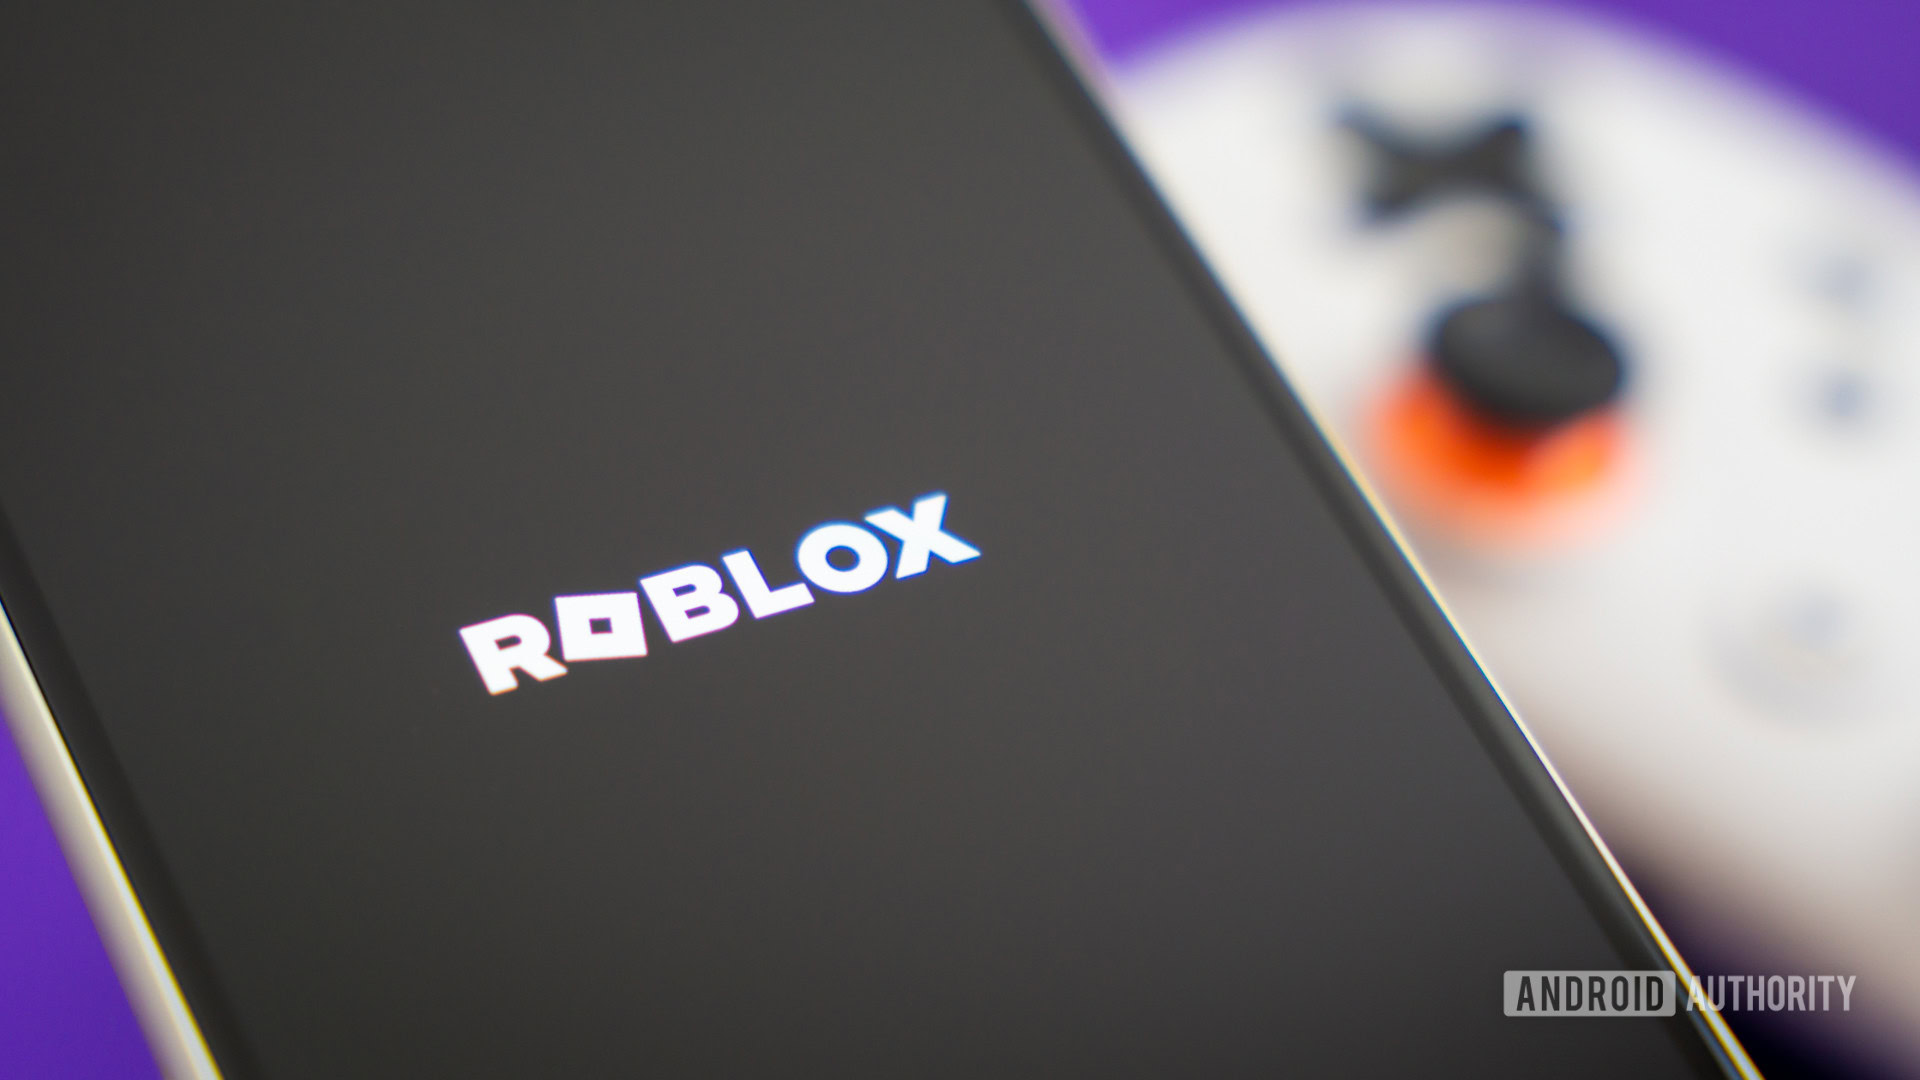 Roblox on X: Roblox has launched on Chromebook devices! Download Roblox on  @GooglePlay, and play on your Chromebook today!    / X